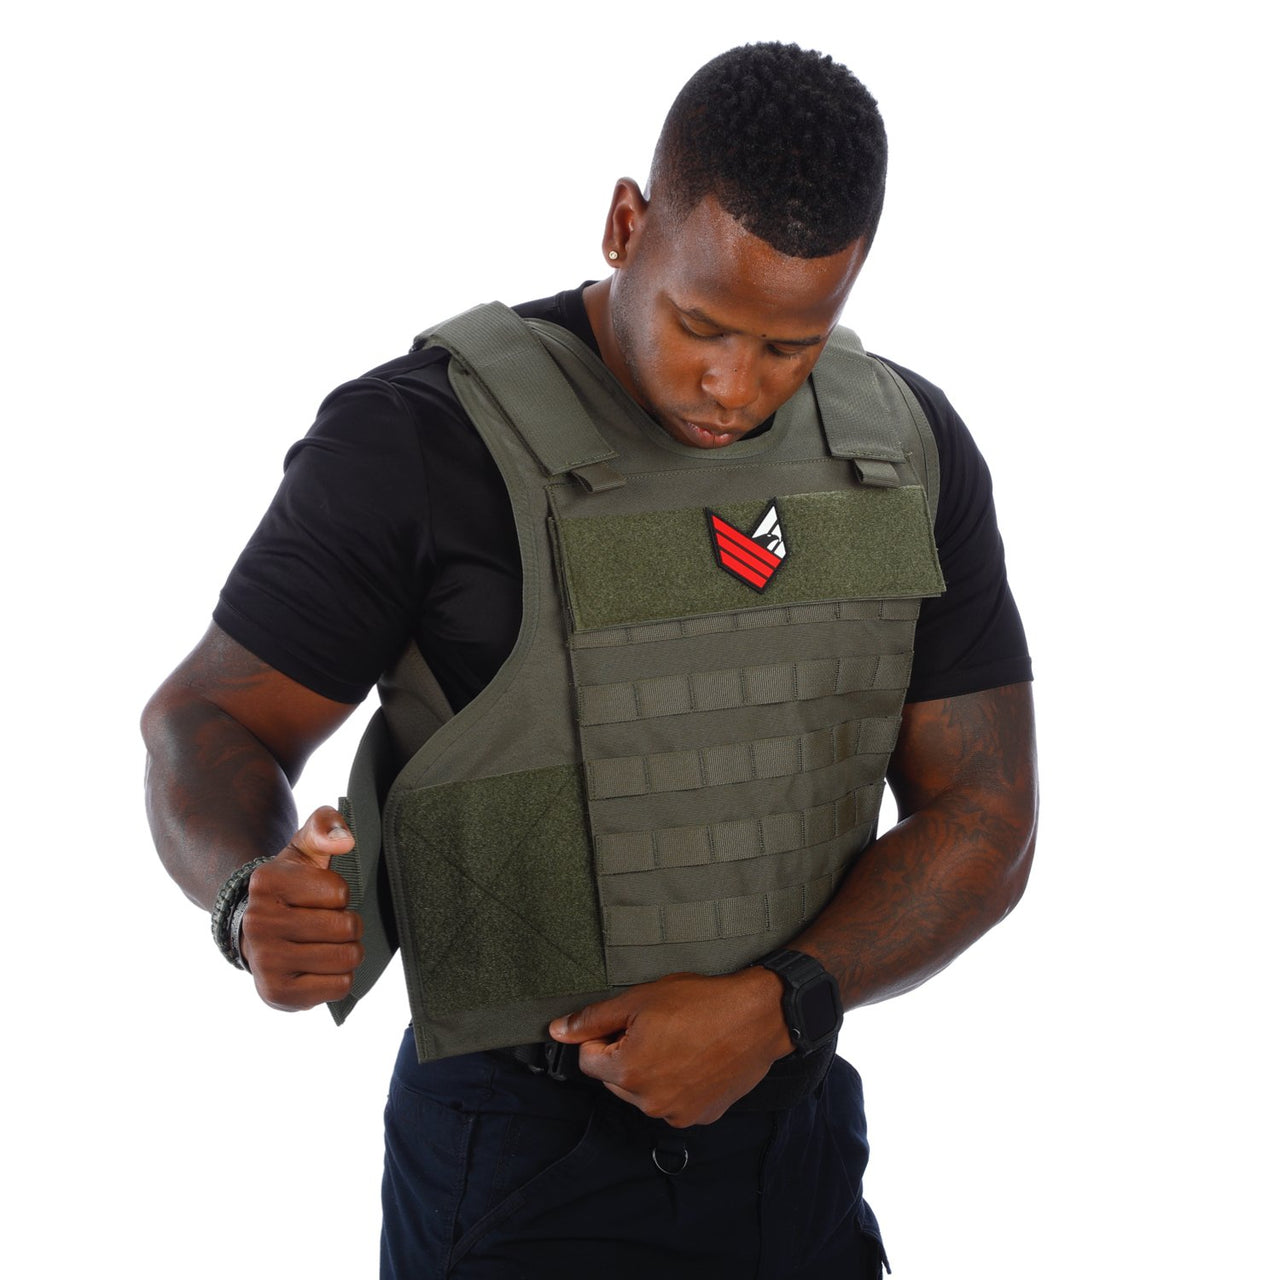 A man wearing a green Body Armor Direct All Star Tactical Enhanced Multi-Threat Vest.